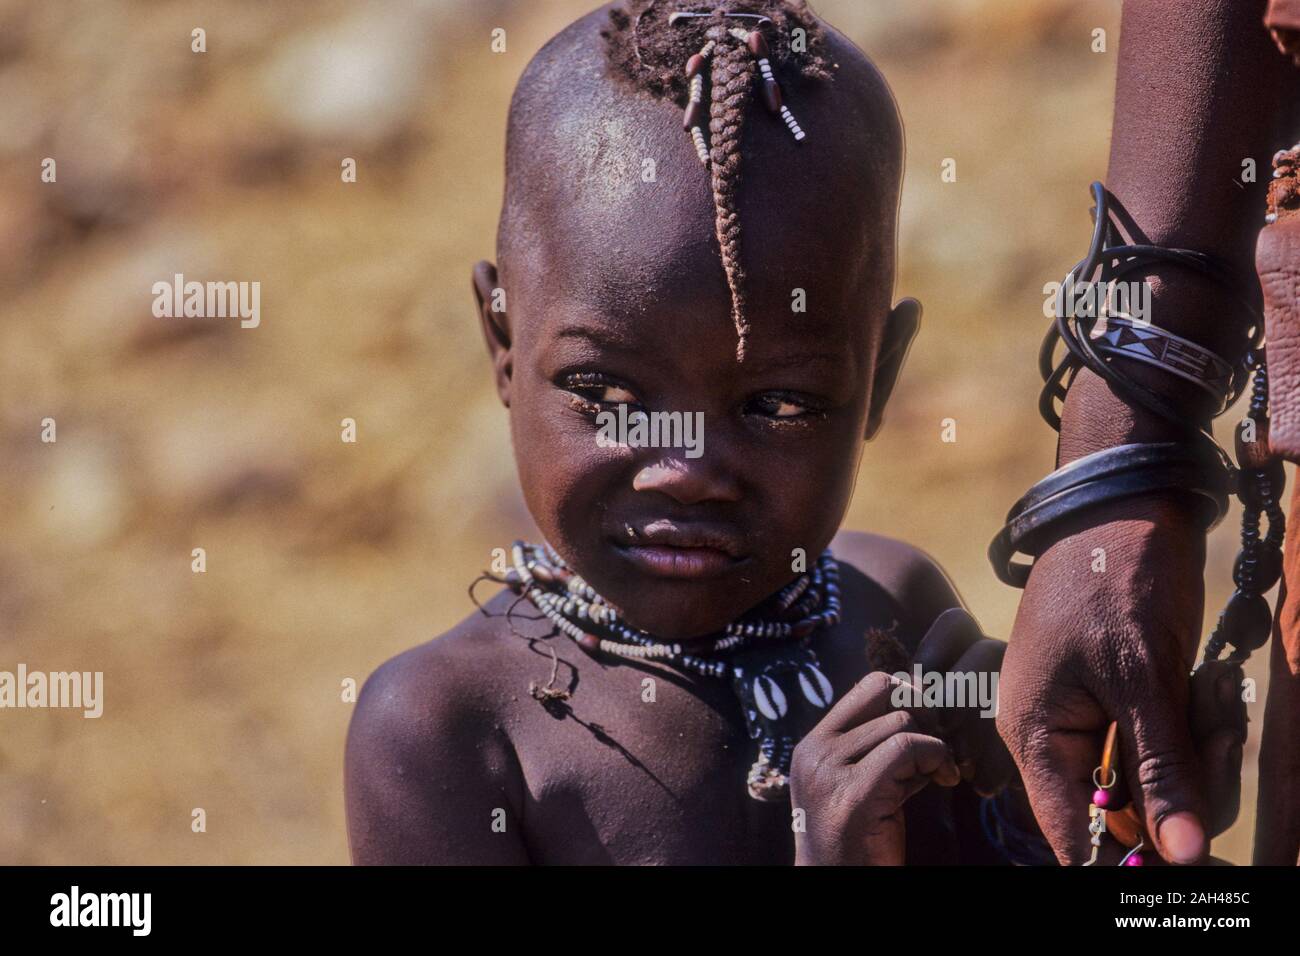 Himba people, Namibia Portrait of a child Stock Photo